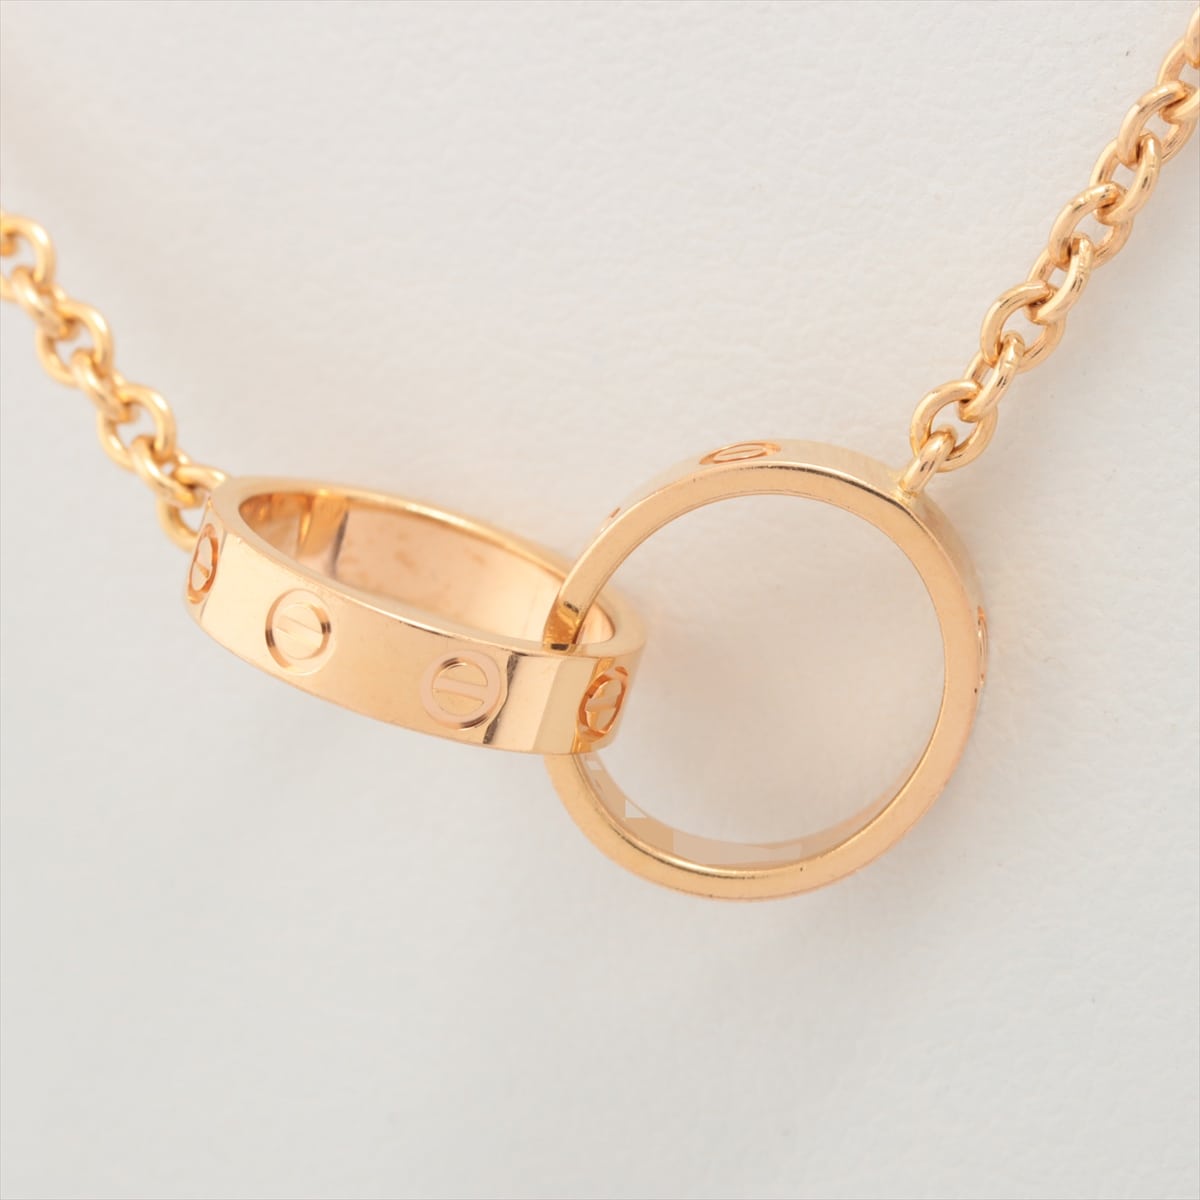 Cartier Baby Love Necklace 750(YG) 7.3g